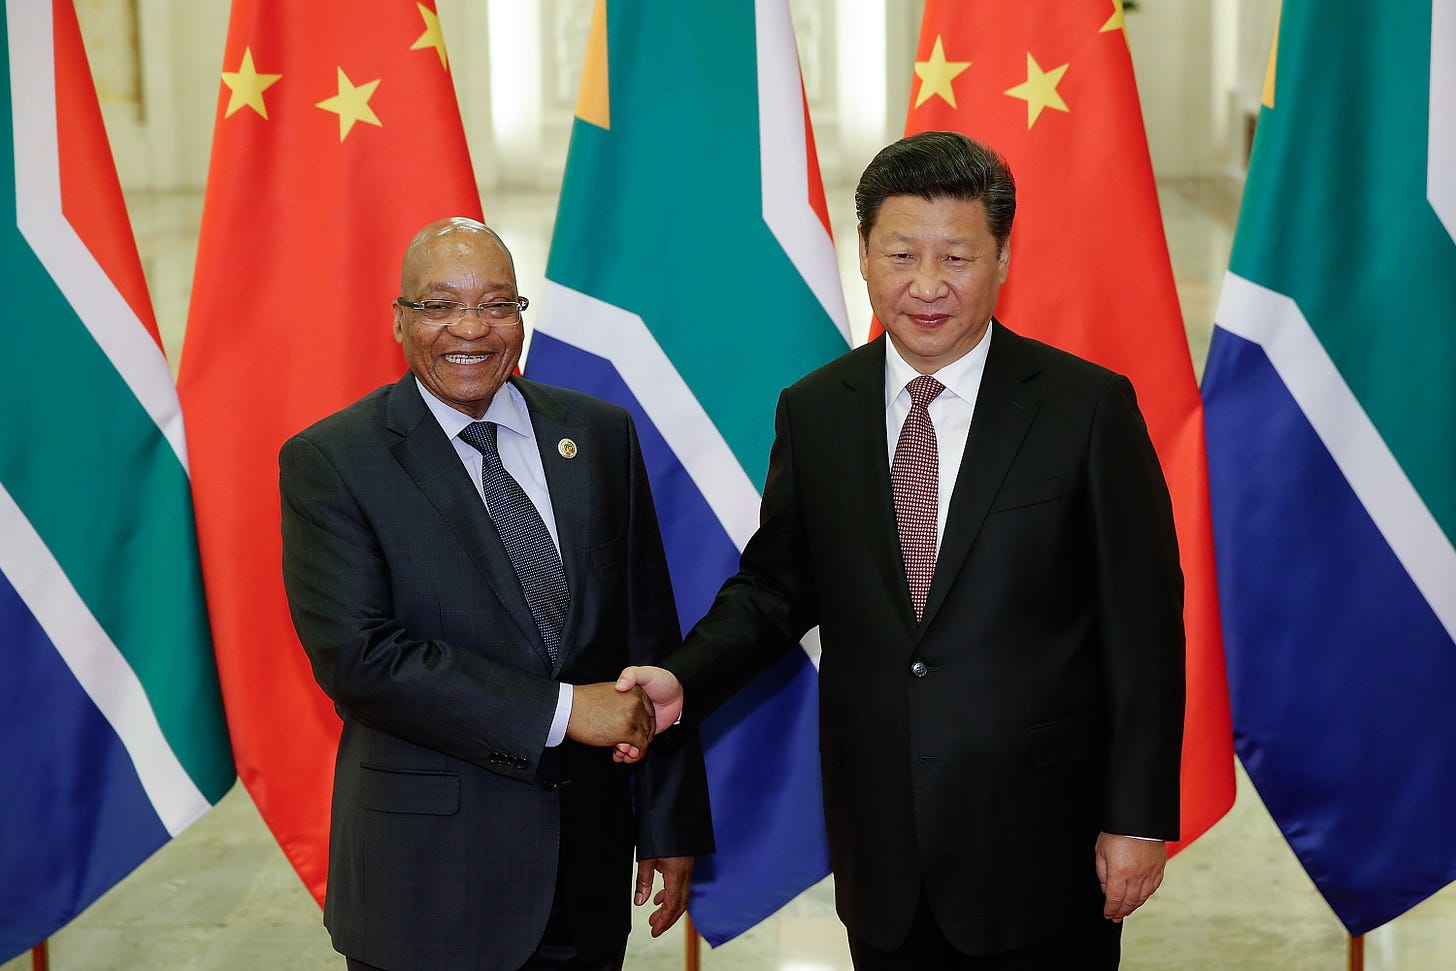 China's Ties to Africa Are Damaging | Fortune